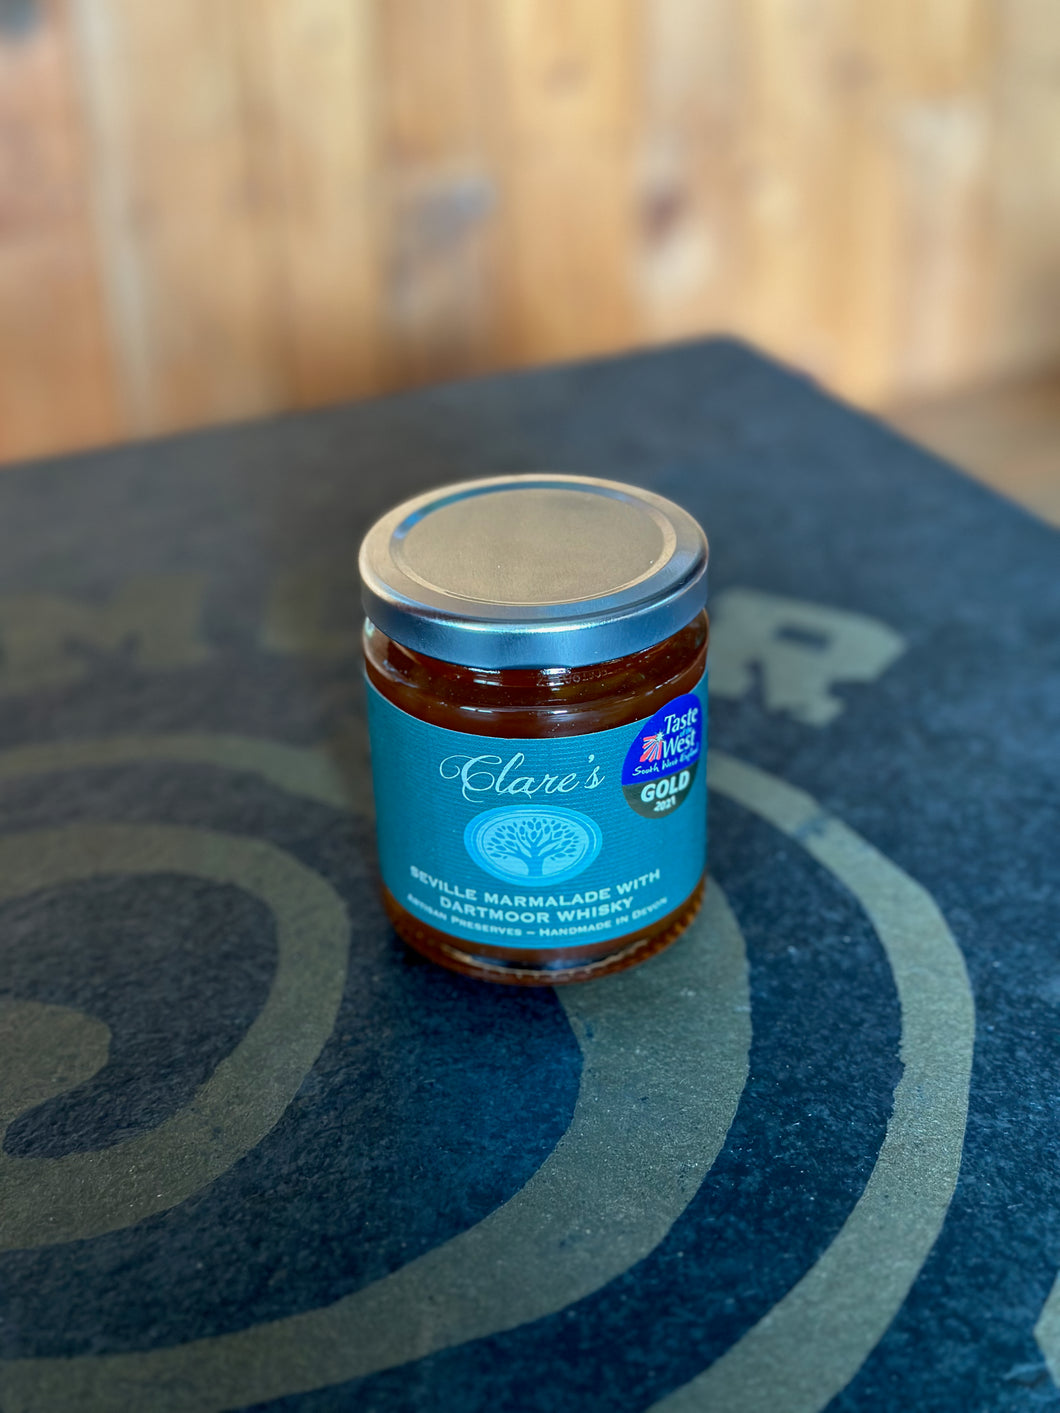 Seville Marmalade with Dartmoor Whisky